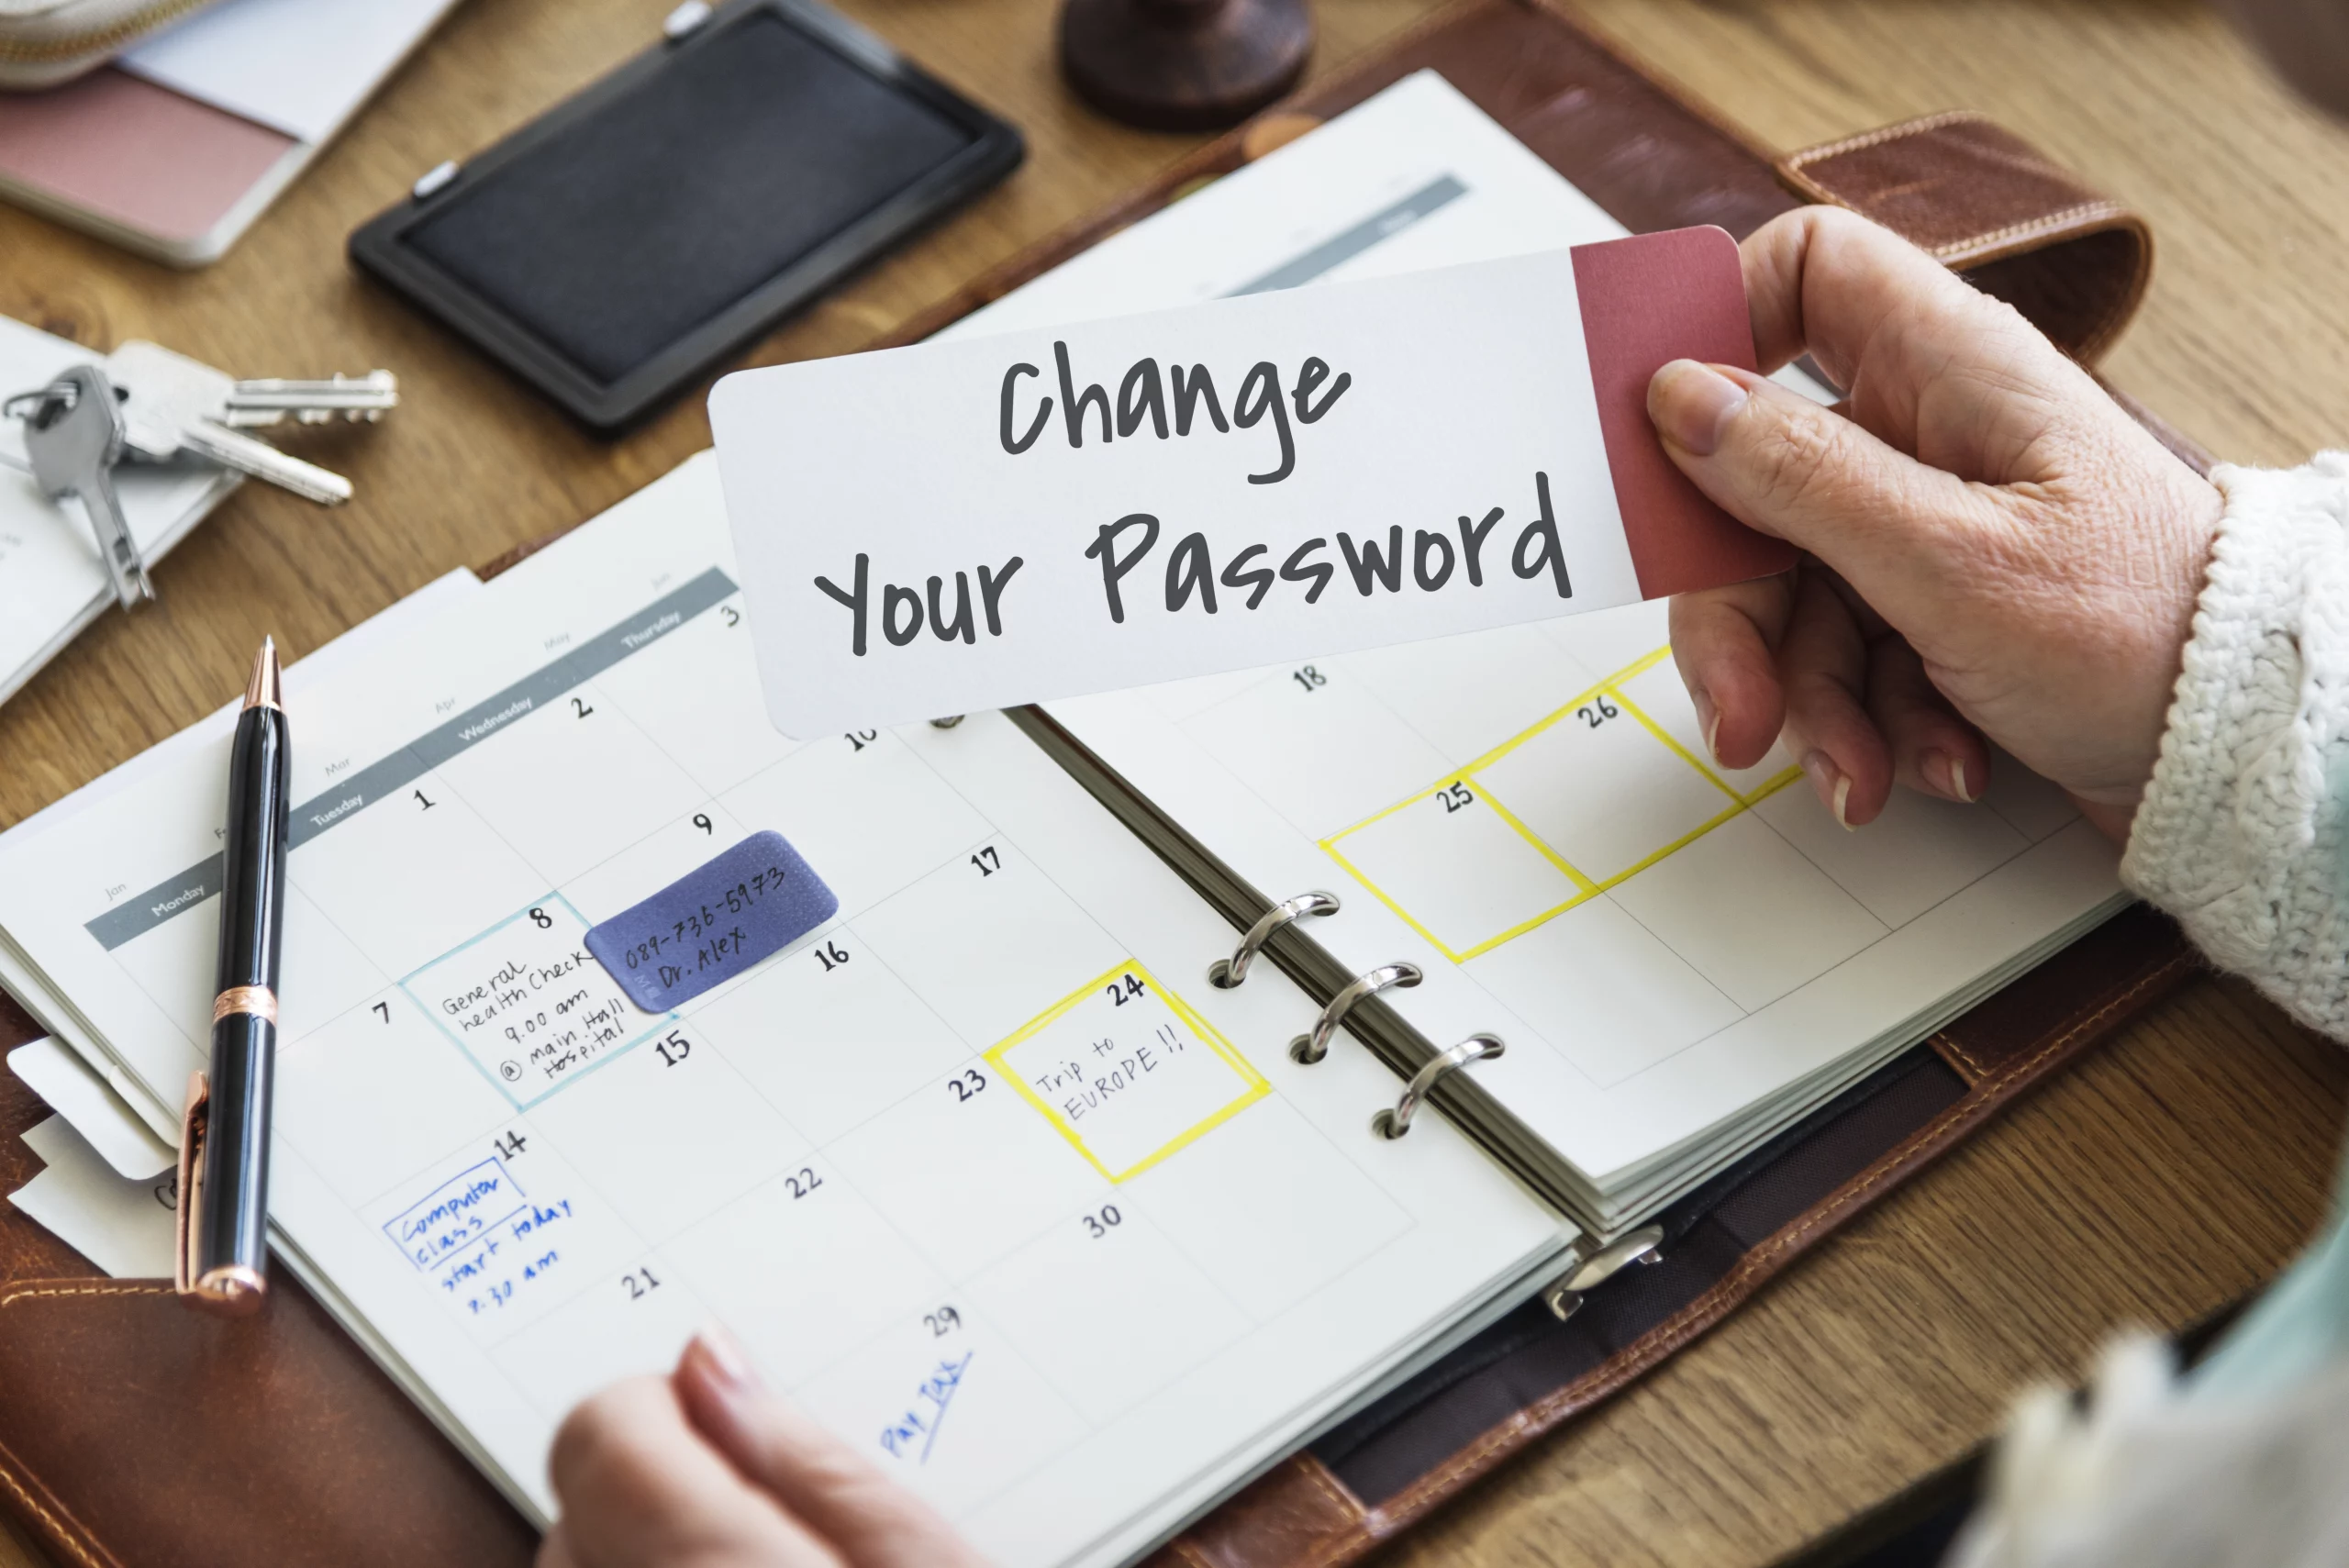 Password Manager Is a Practical Feature for Internet Users Due to the Variety of Online Services